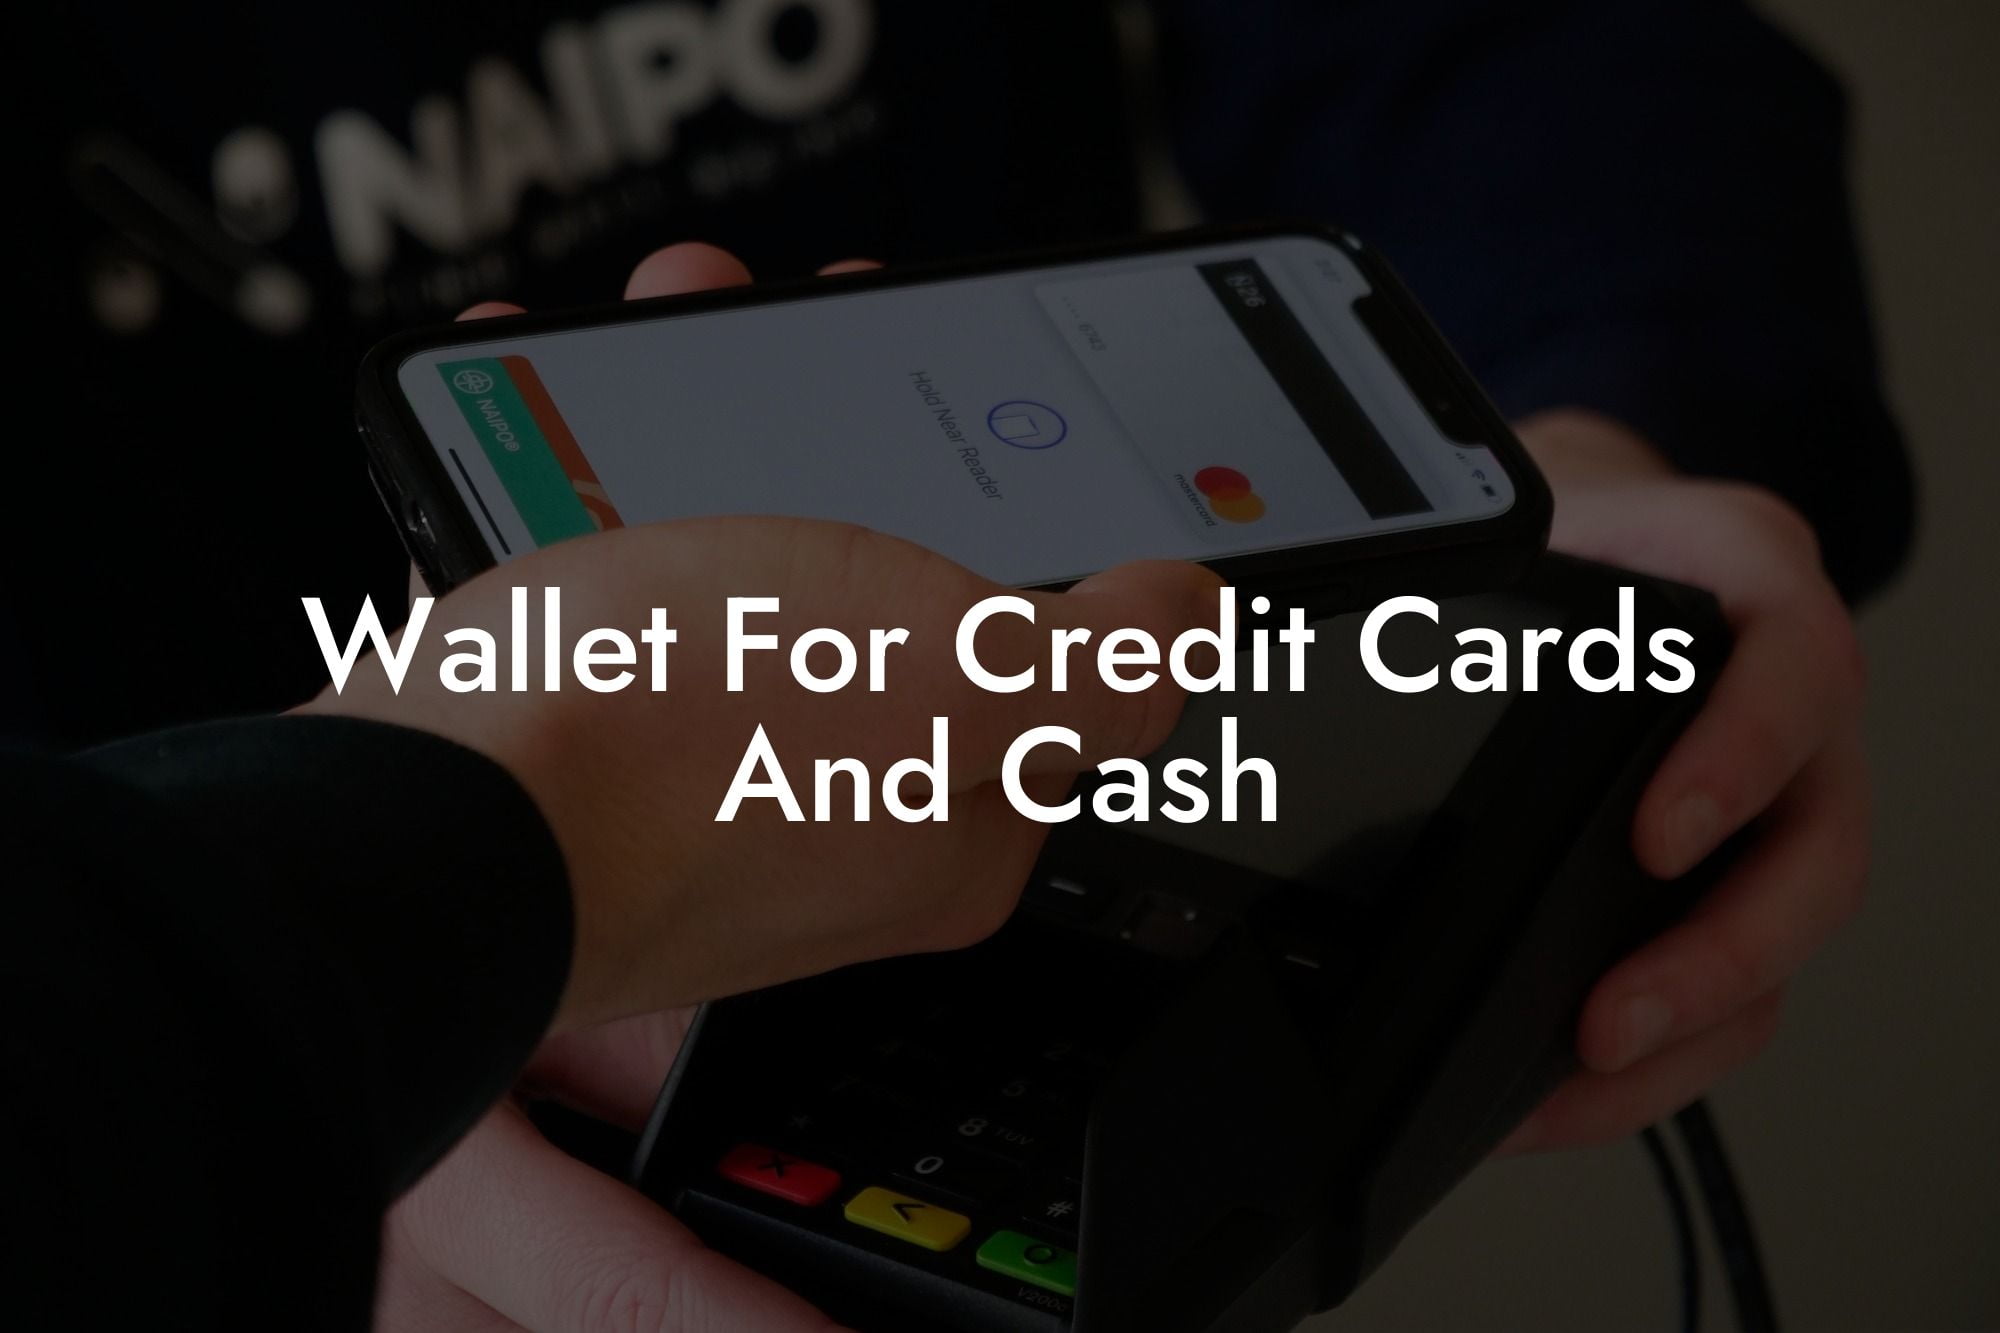 Wallet For Credit Cards And Cash